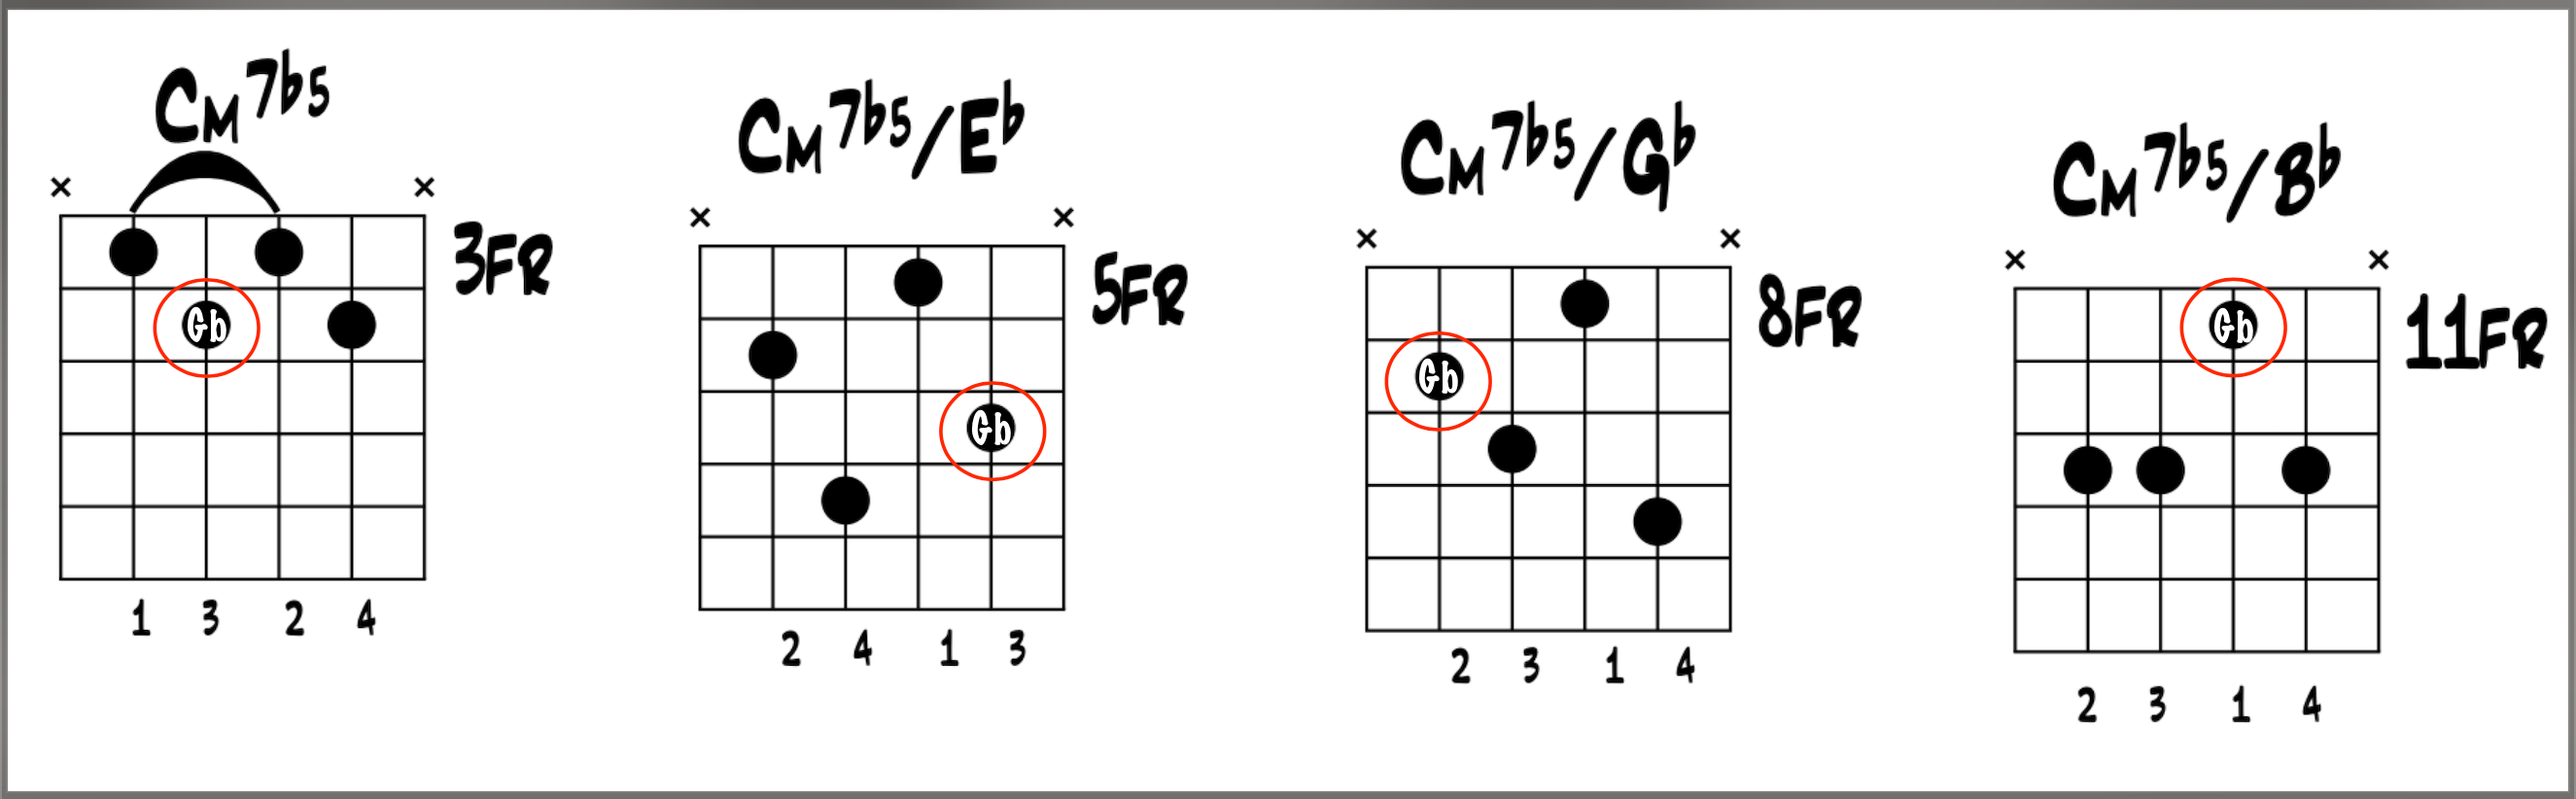 Jazz Guitar: Cm7b5 on the B String Group with all inversions